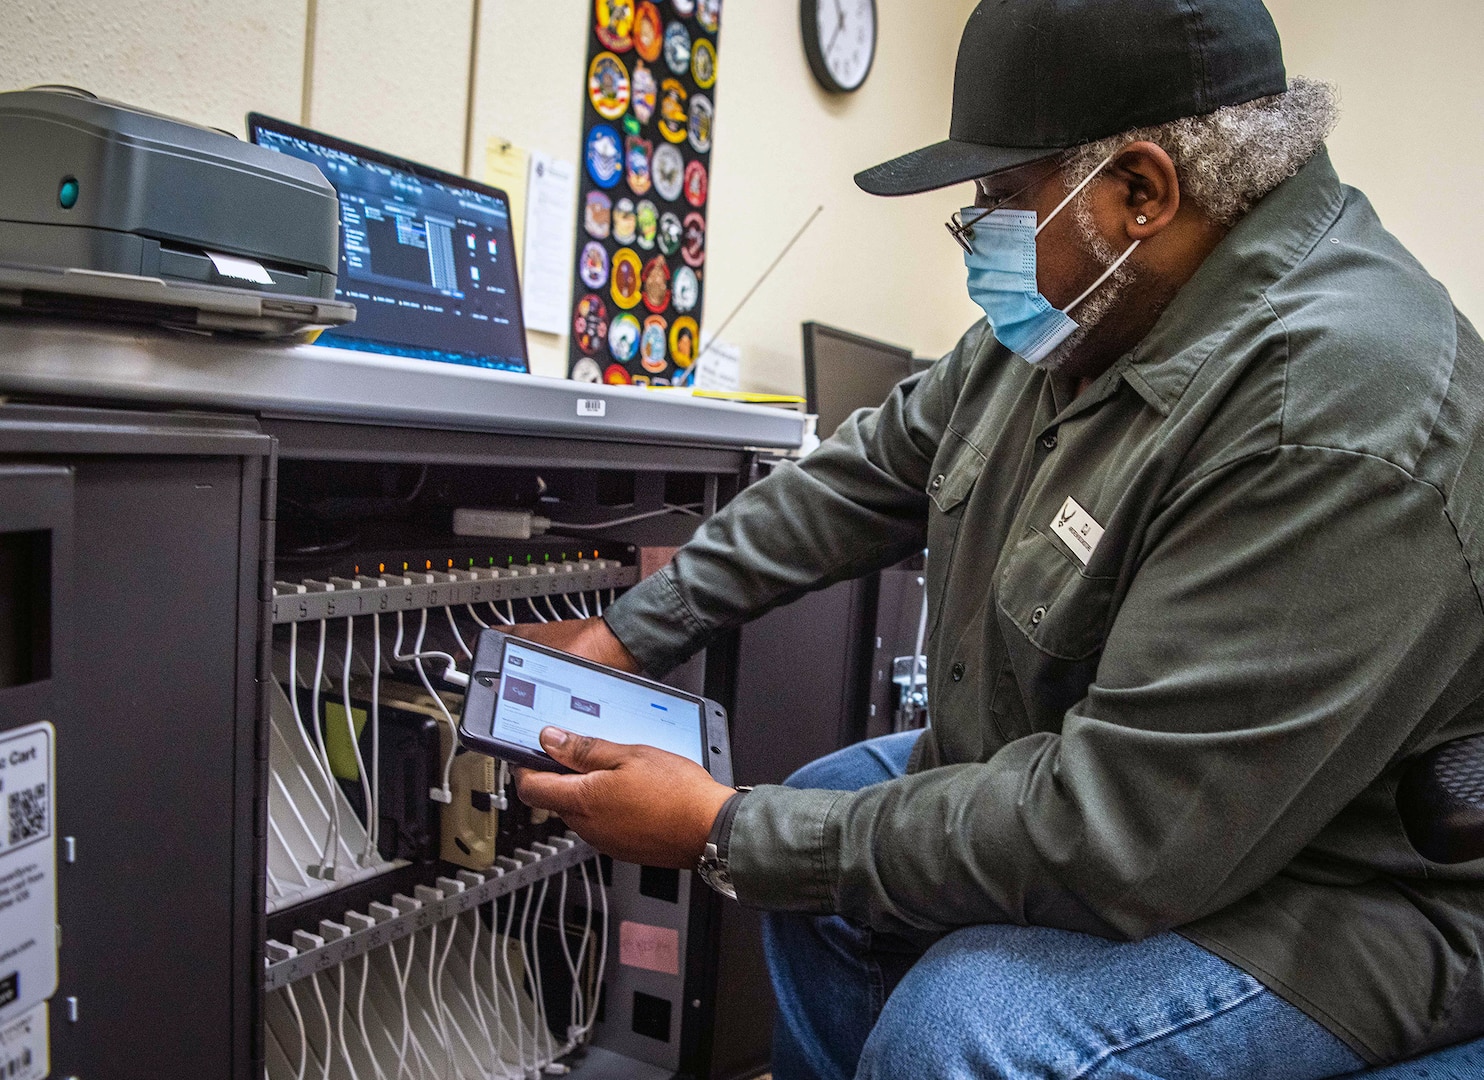 Charlie Turner, 12th Training Squadron electronic flight bag hardware manager, loads EFB devices into a charging station as he prepares for a software update Oct. 1, 2020, at Joint Base San Antonio-Randolph.